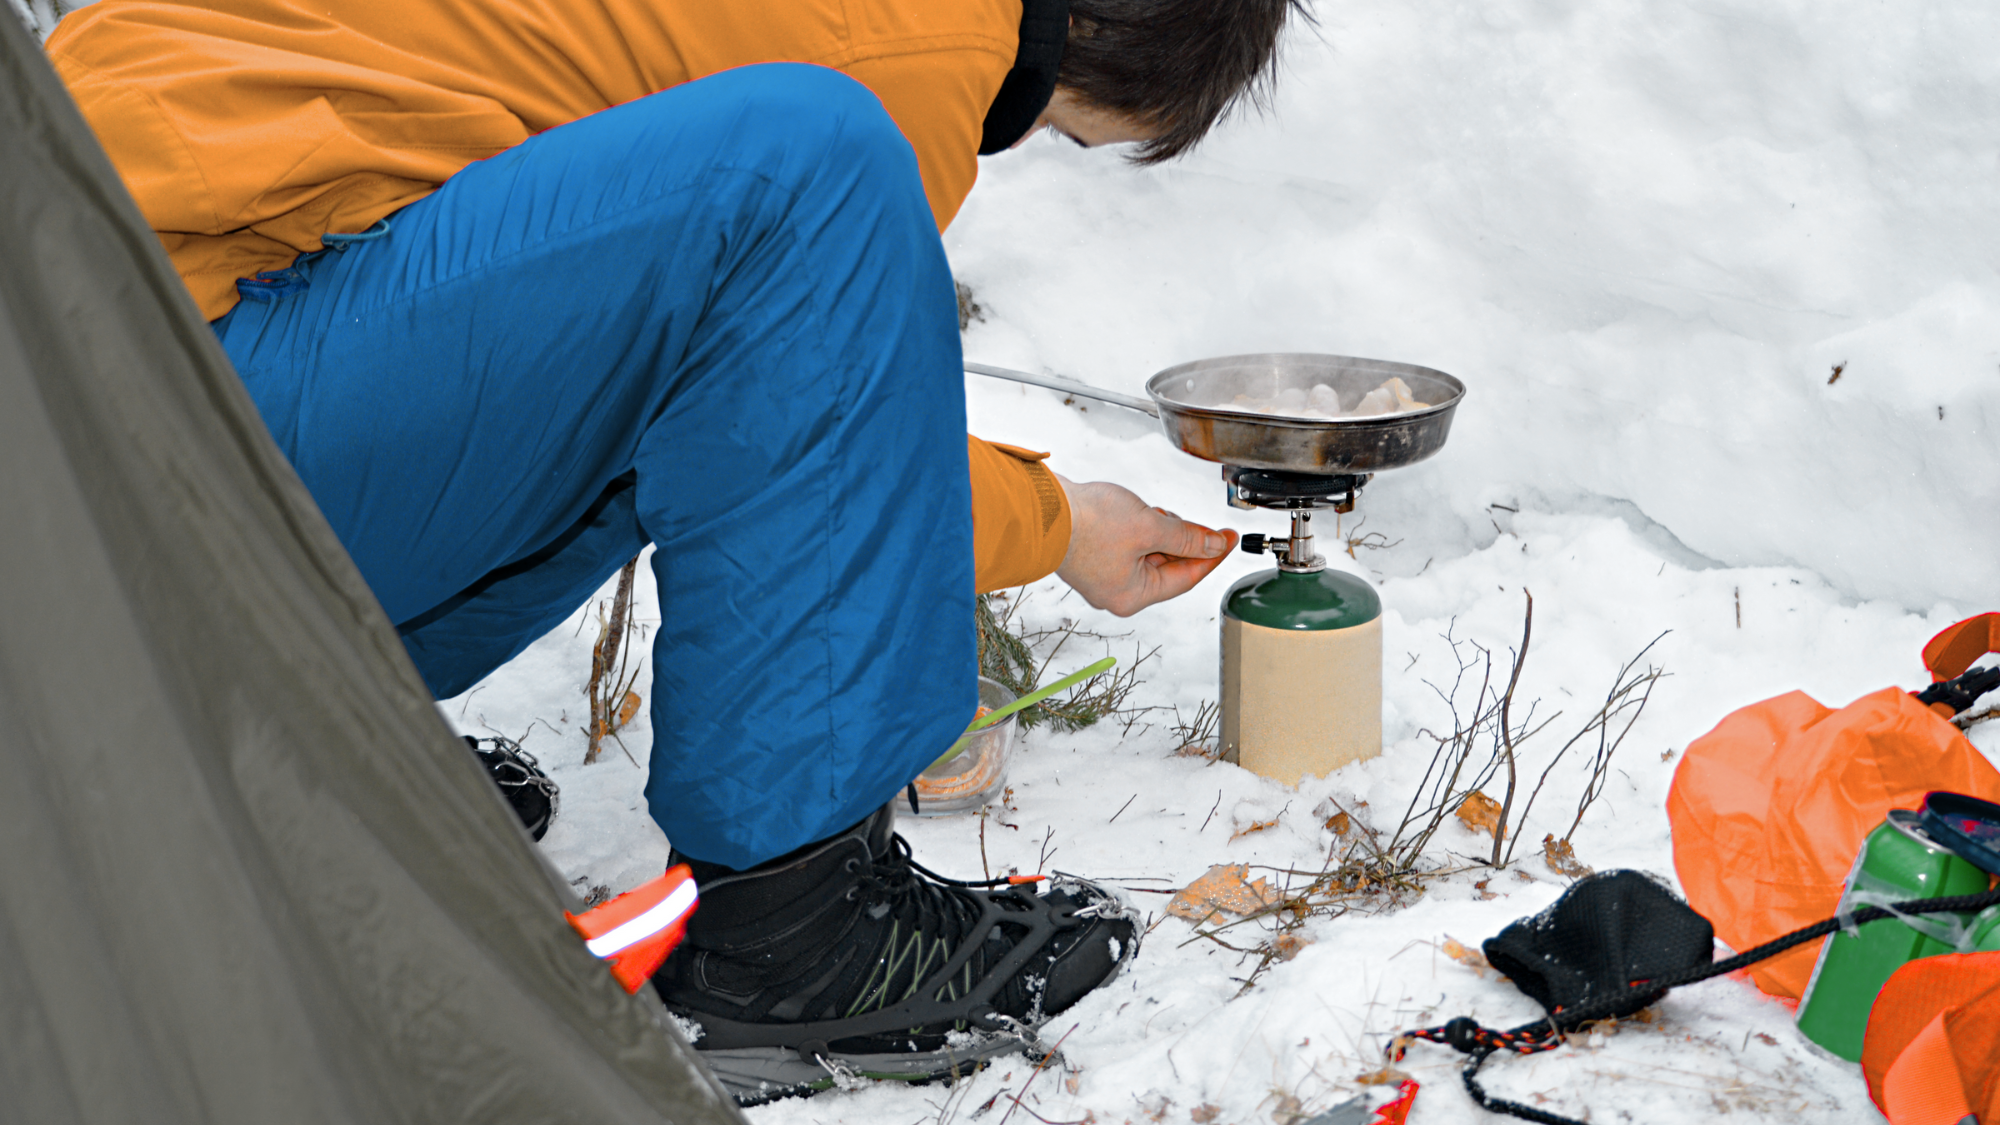 person lighting propane burner to cook while camping in snow